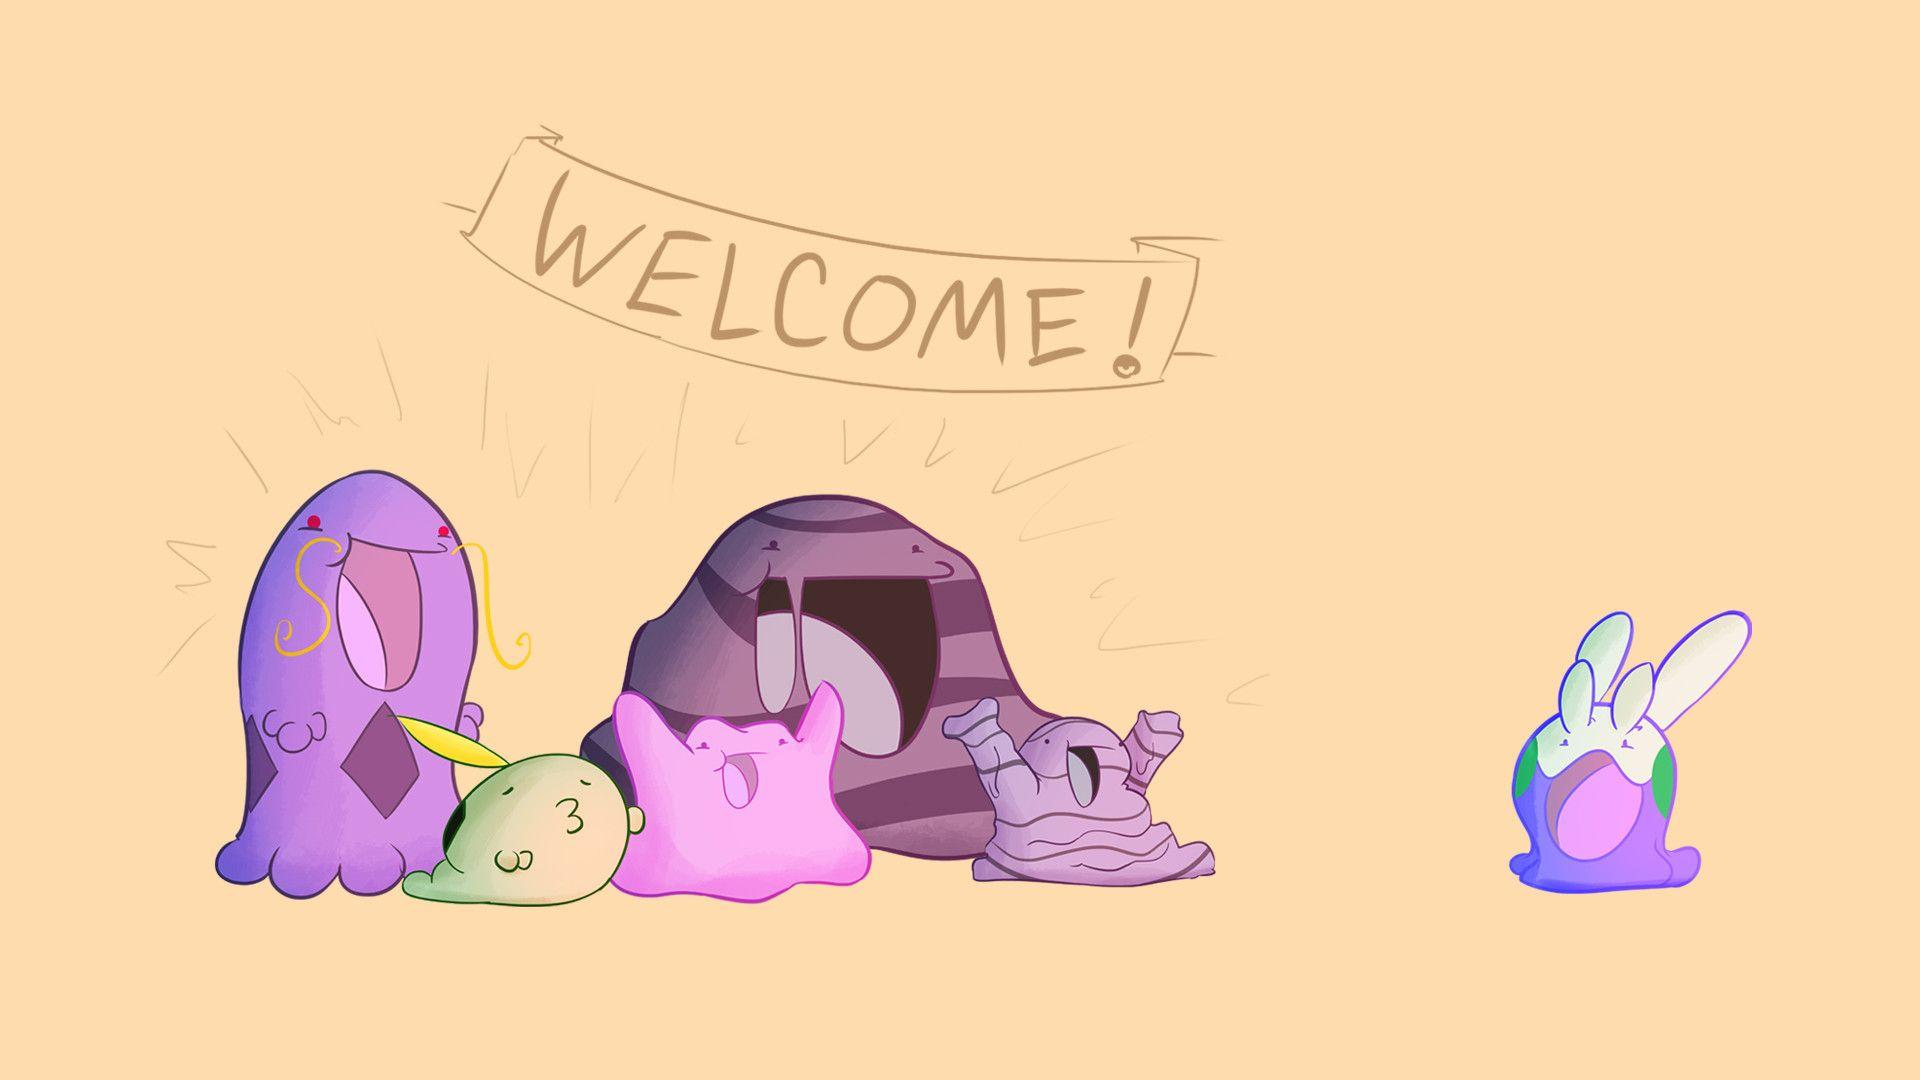 With all the Goomy love here, I thought I'd draw the welcoming party